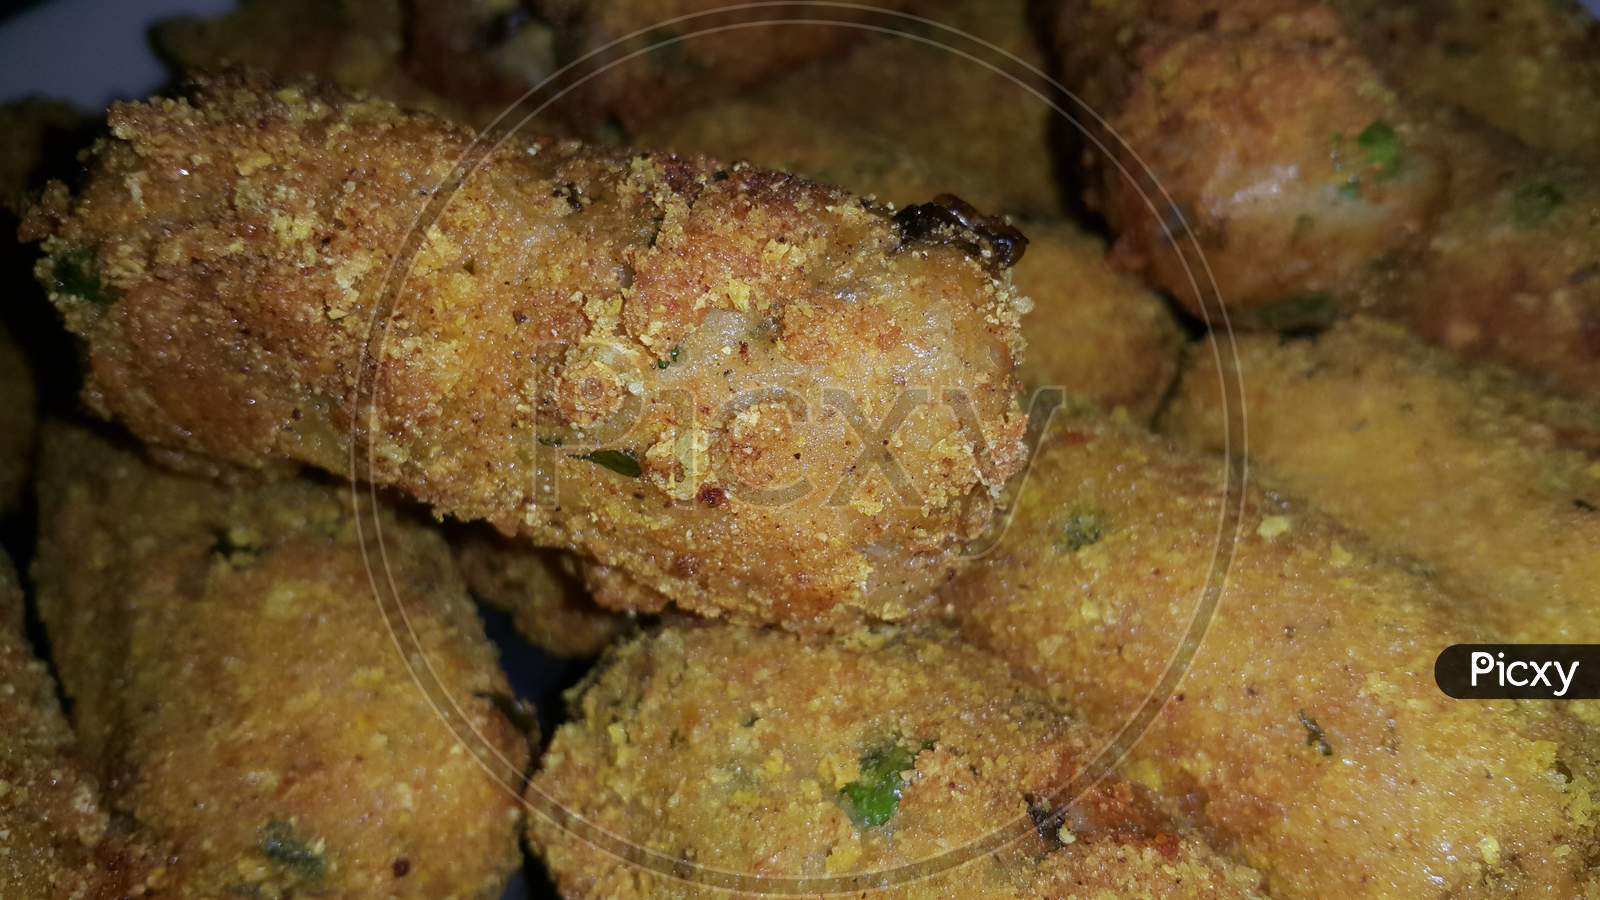 Spicy And Delicious Fried Croquettes With A Closeup Perspective View